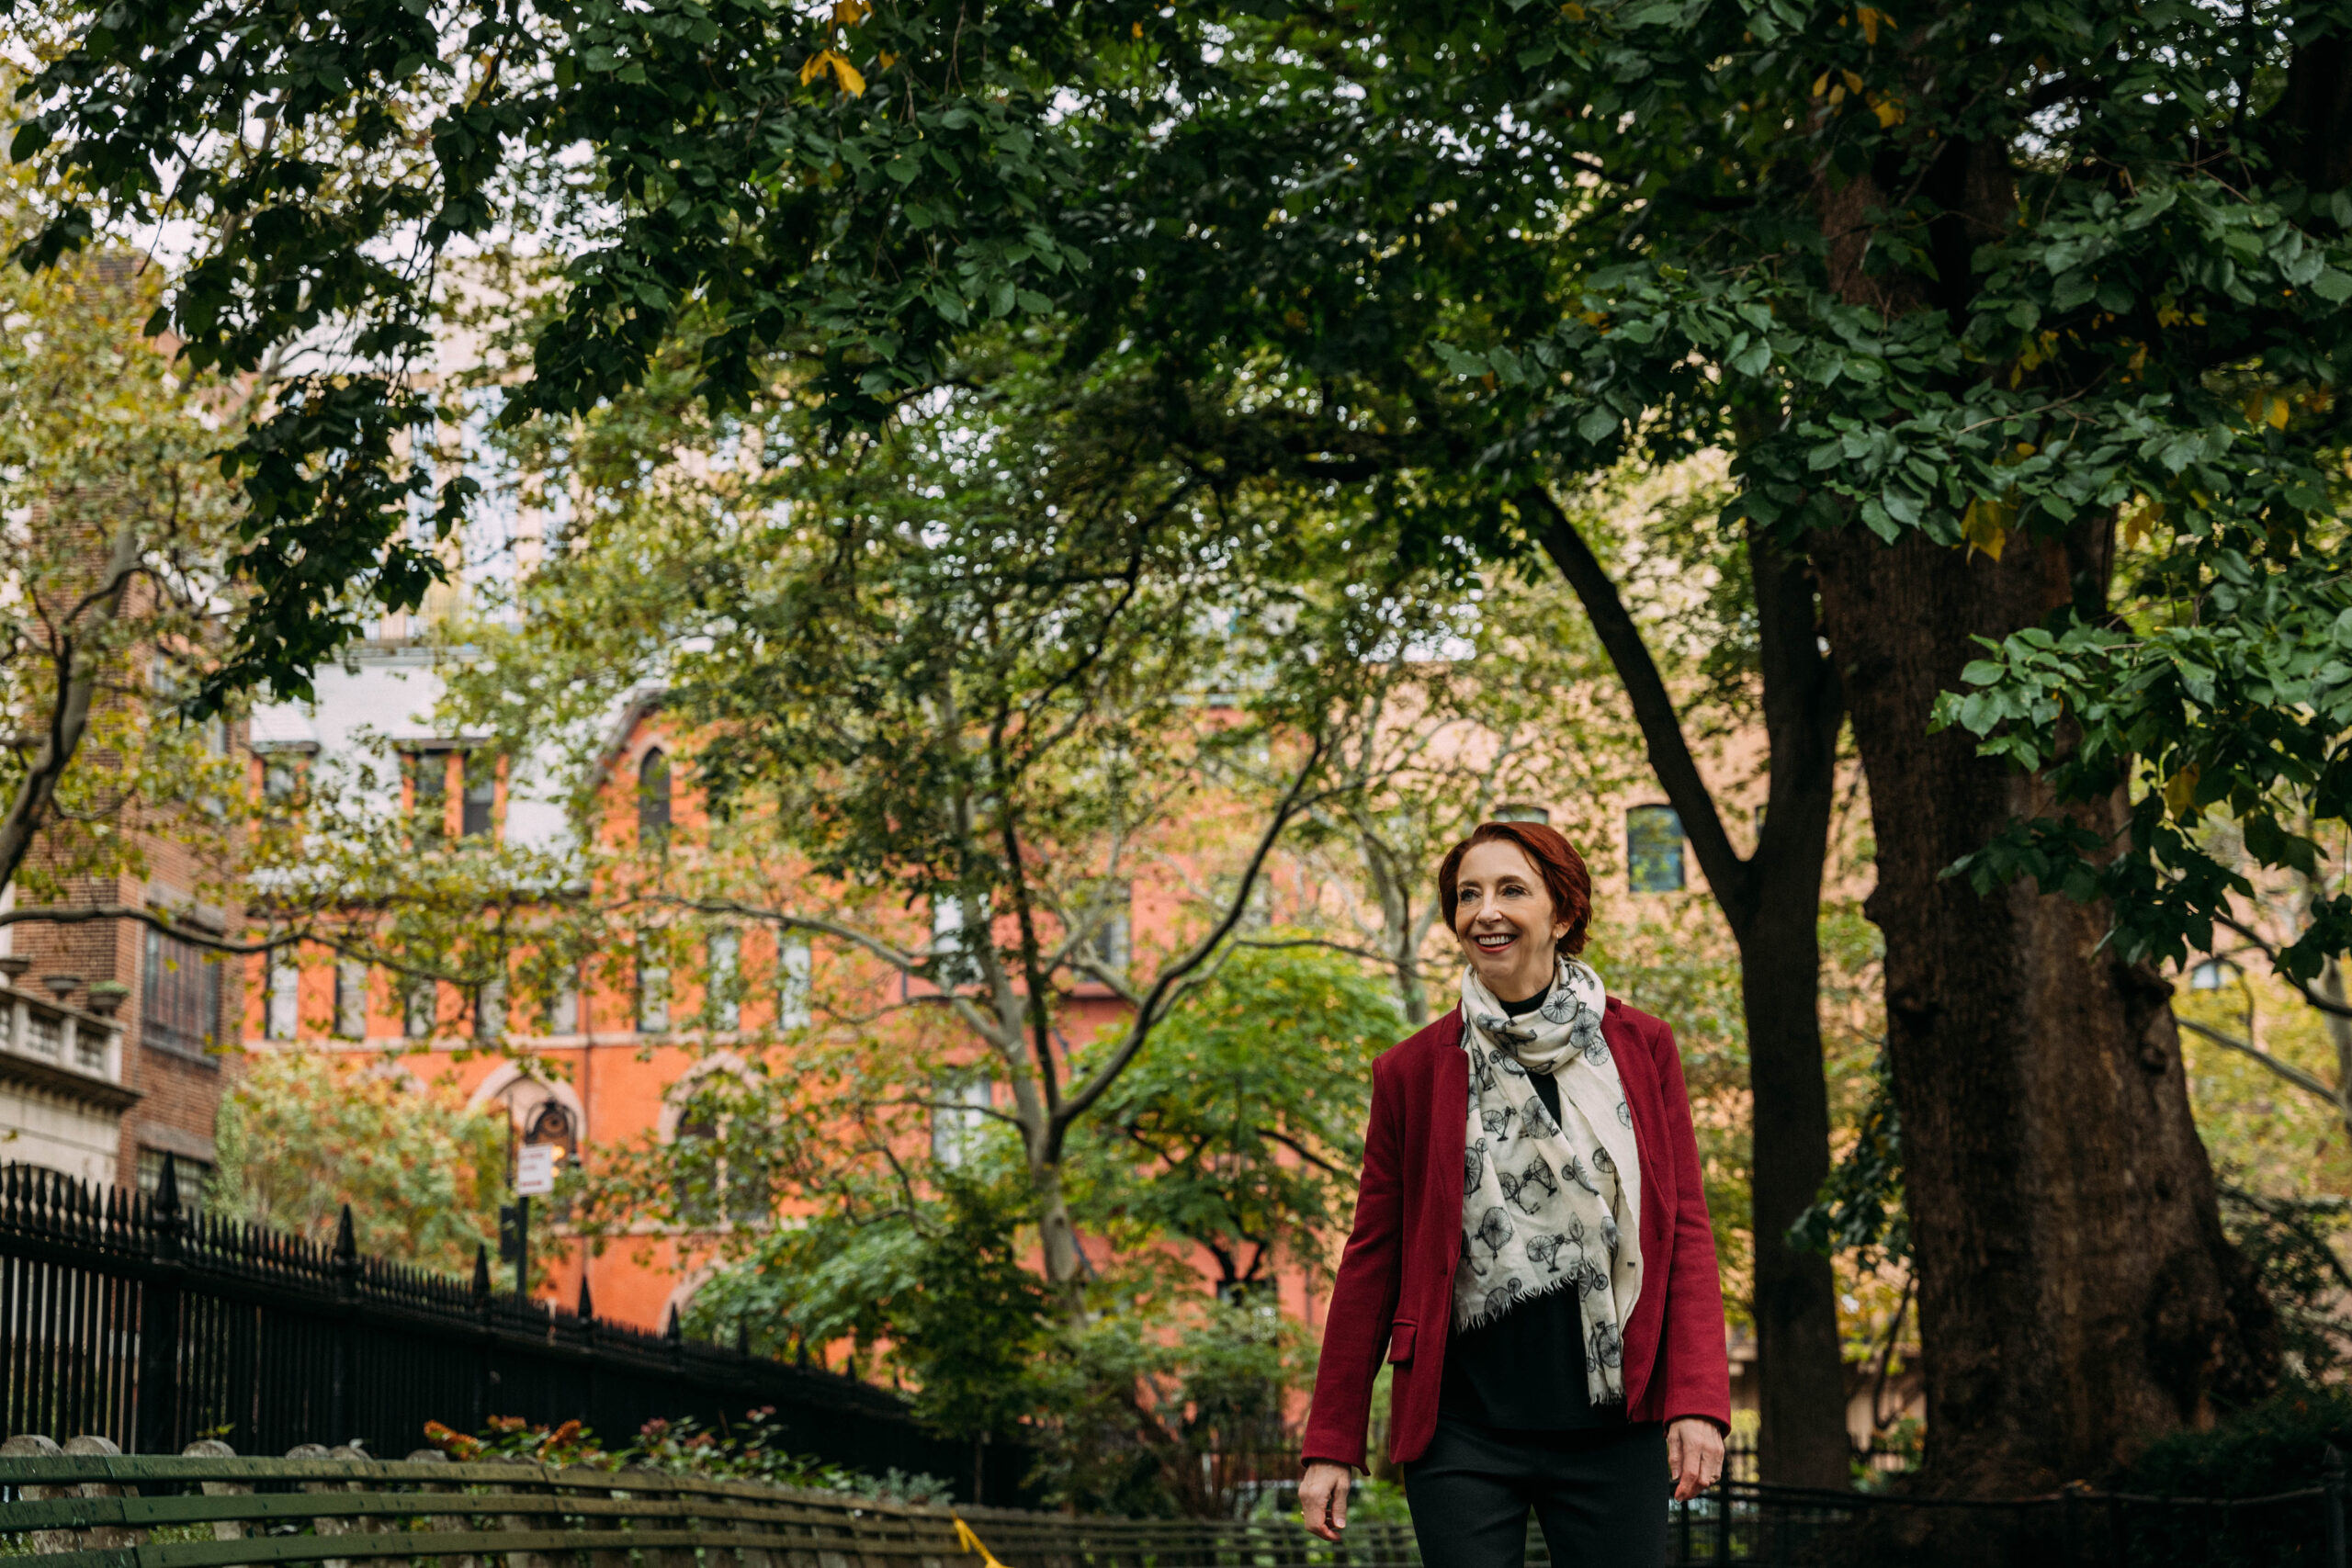 Martha walking in a red coat with a white and green scarf on, under a canopy of trees with buildings in the distance.